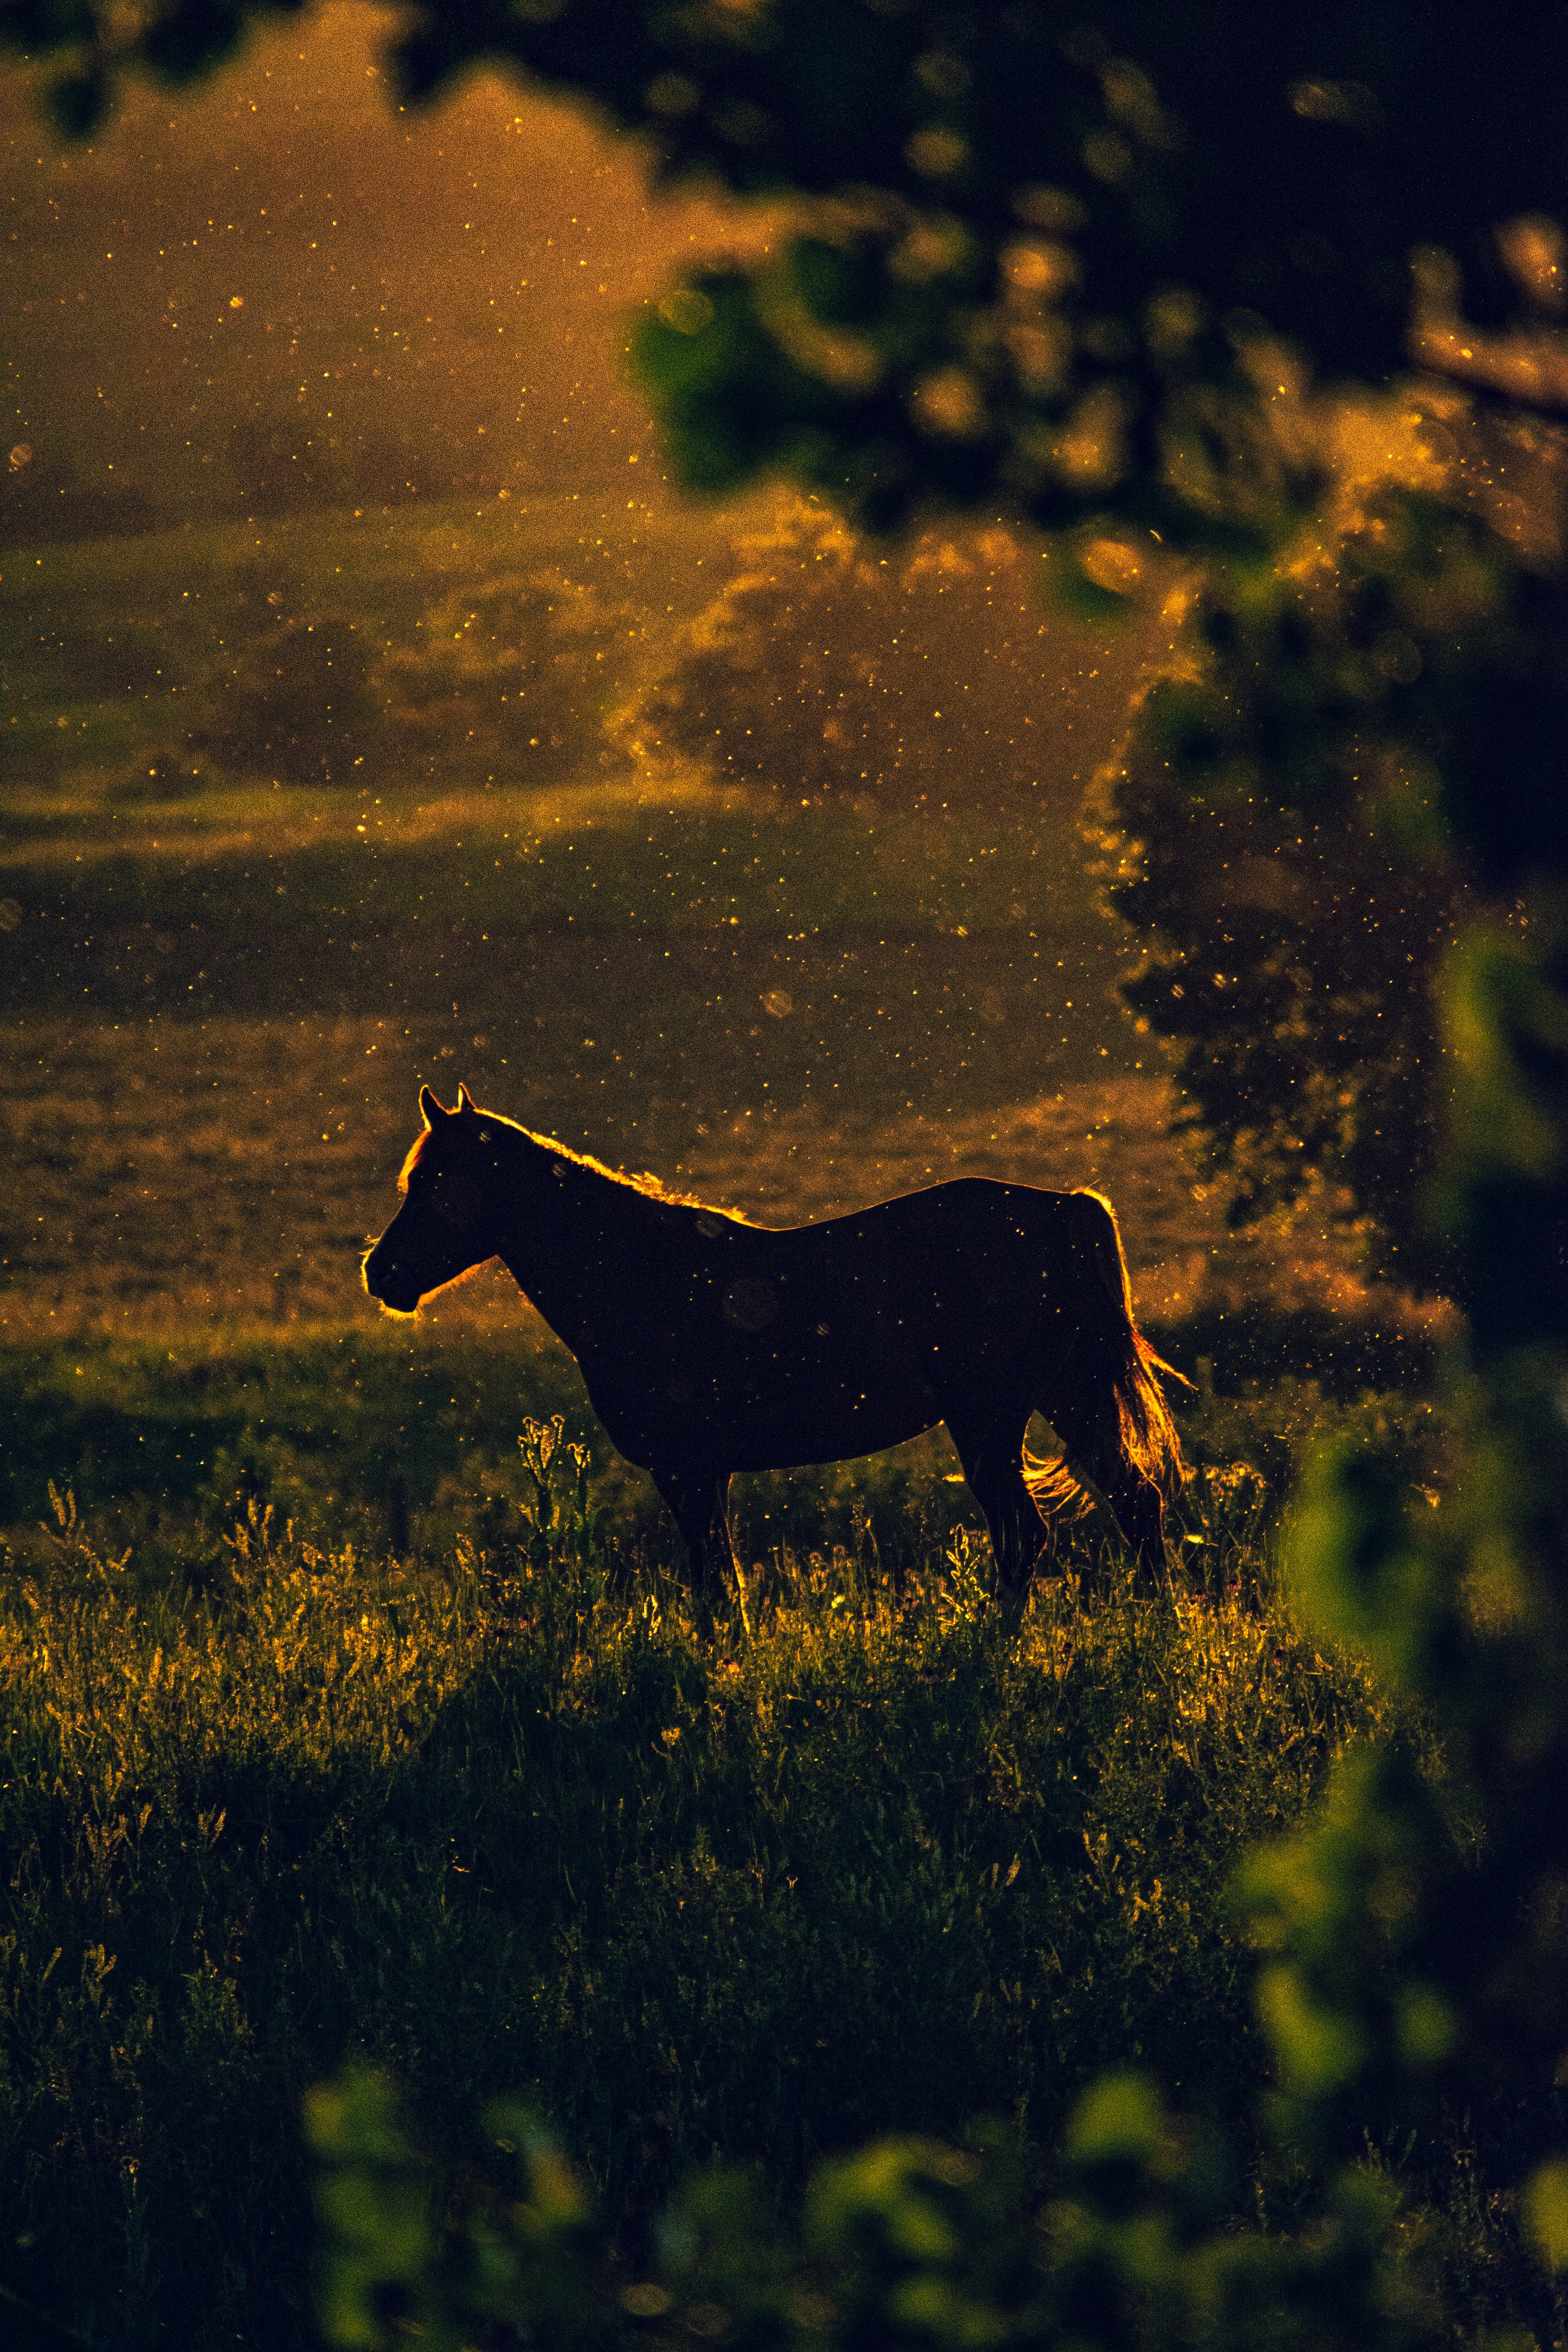 Windows Backgrounds sunset, nature, dark, silhouette, horse, meadow